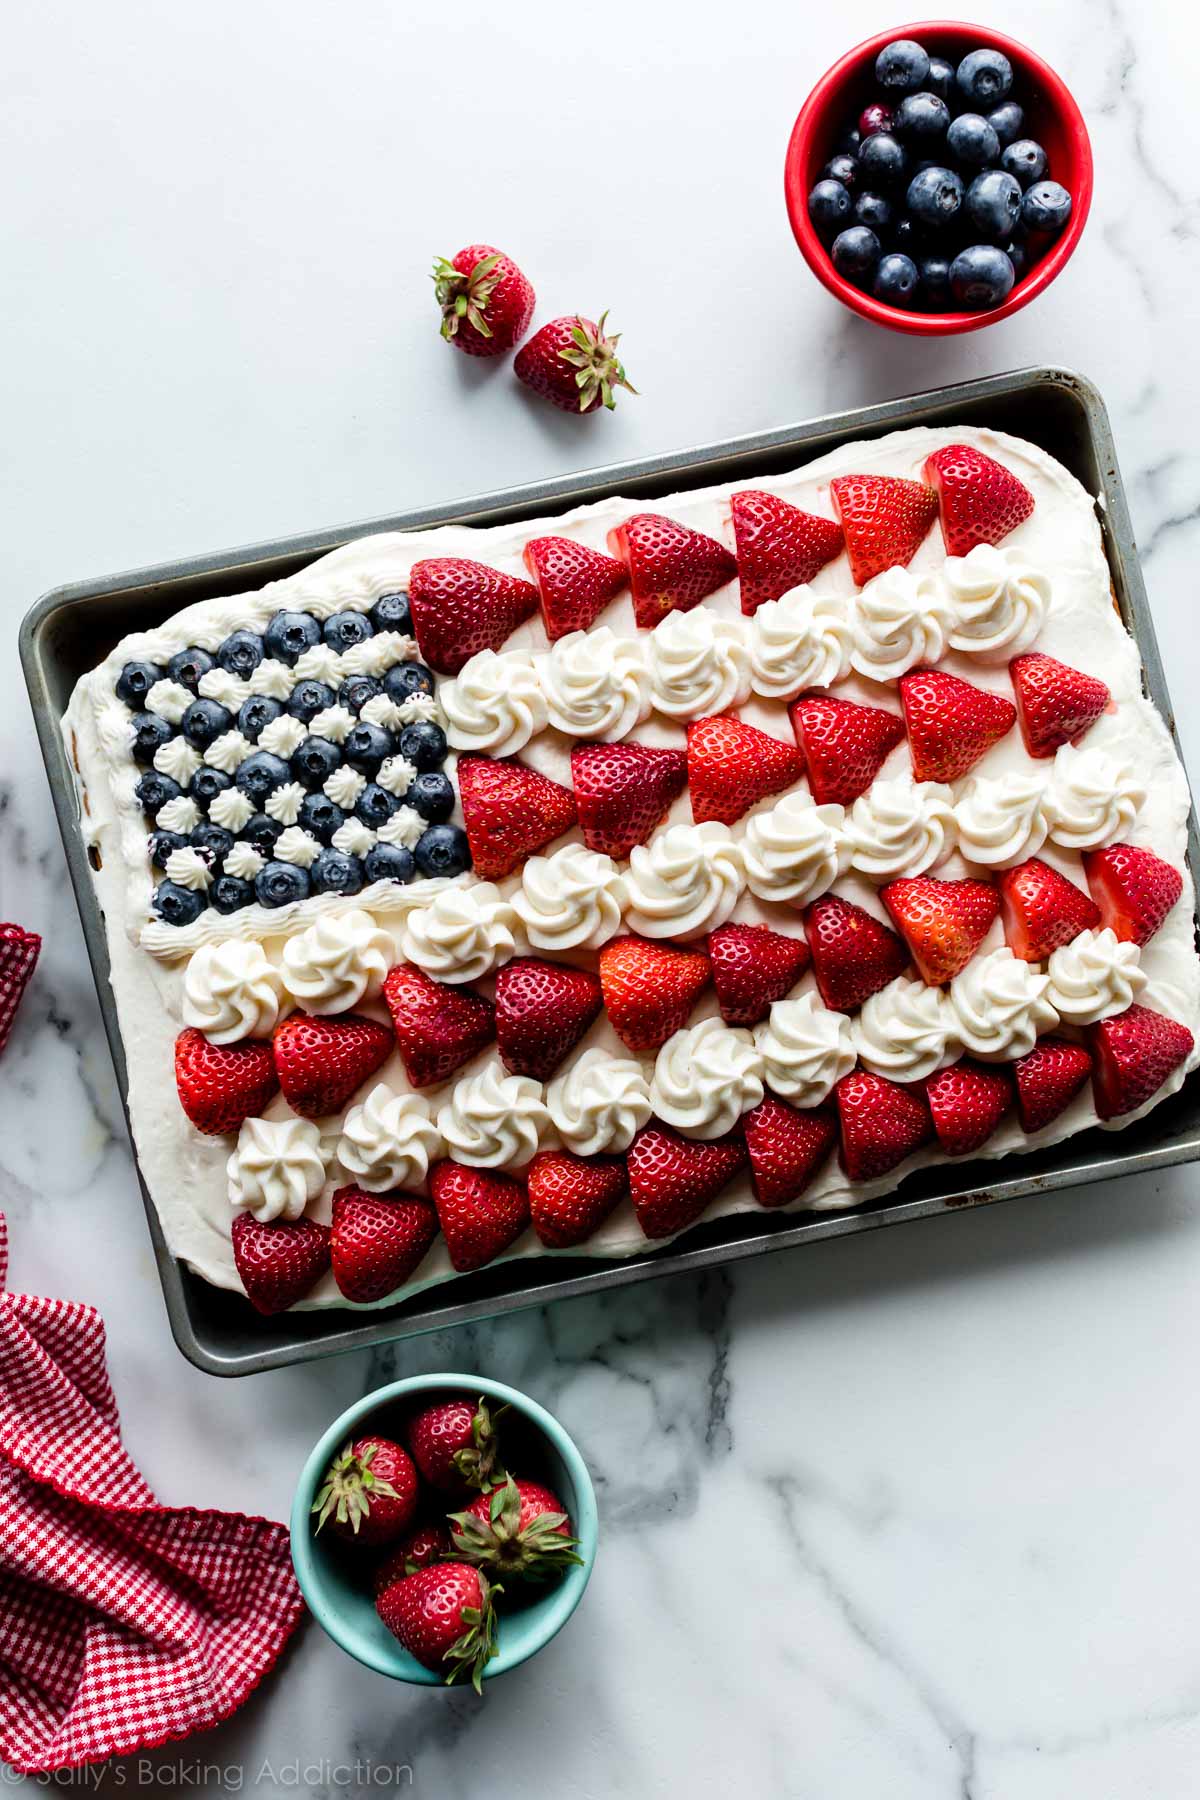 vanilla sheet cake decorated like an American flag with berries and frosting